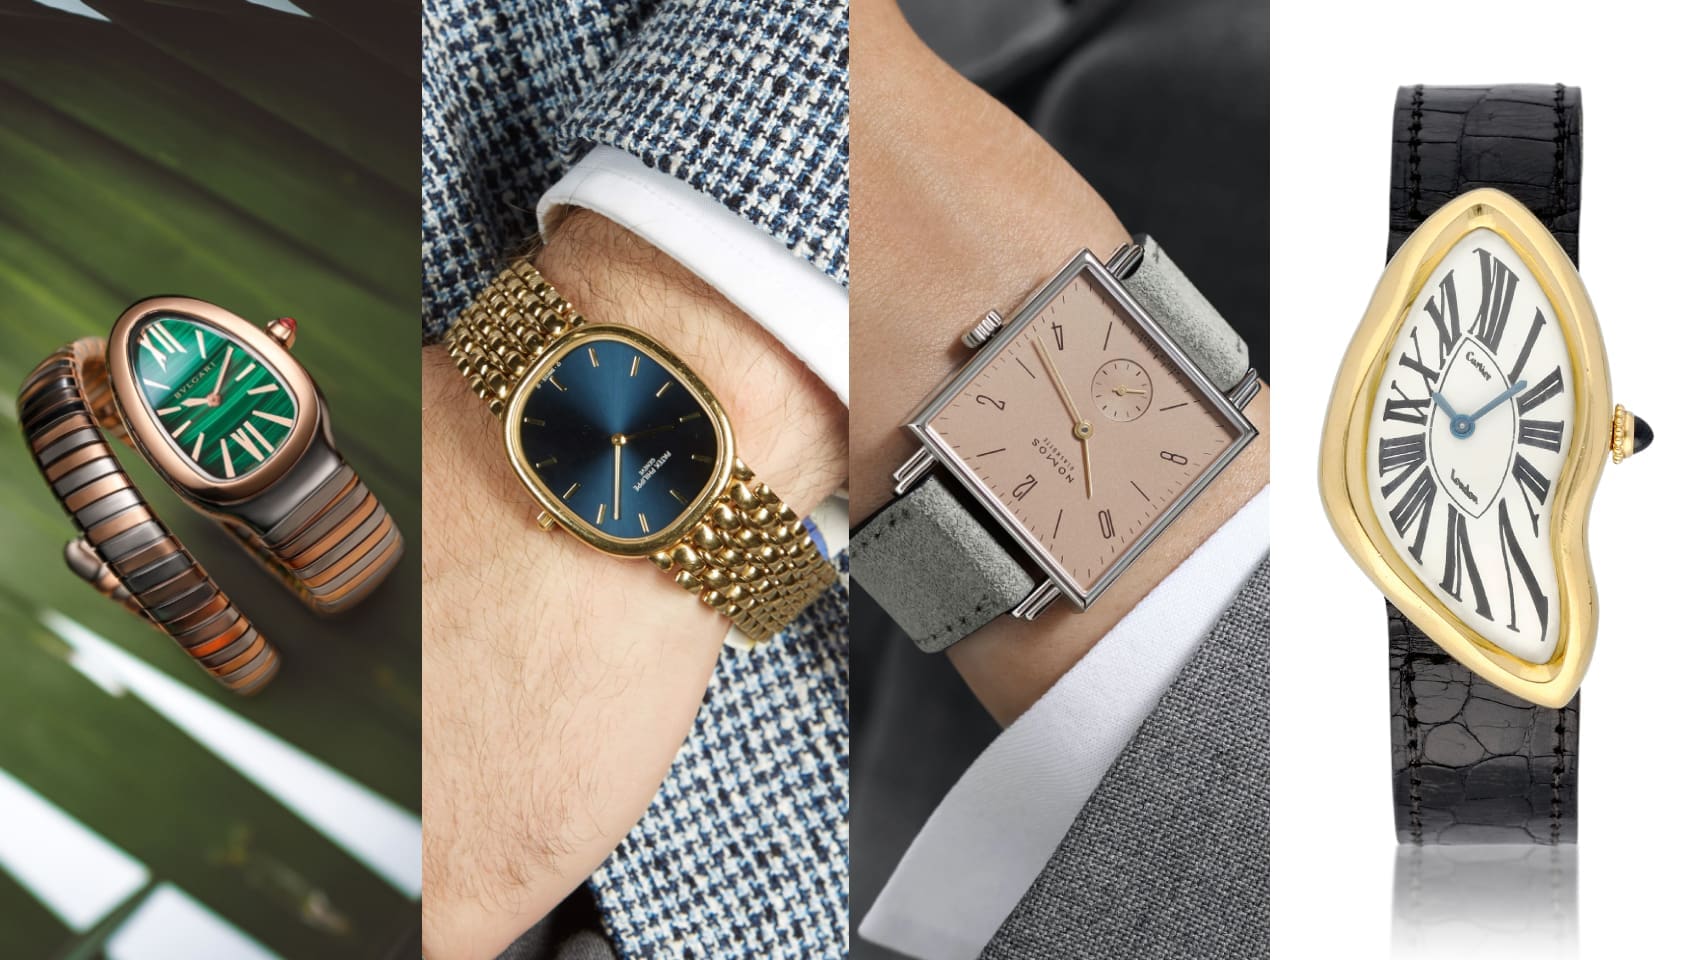 Dress watches that are unlikely streetwear champions